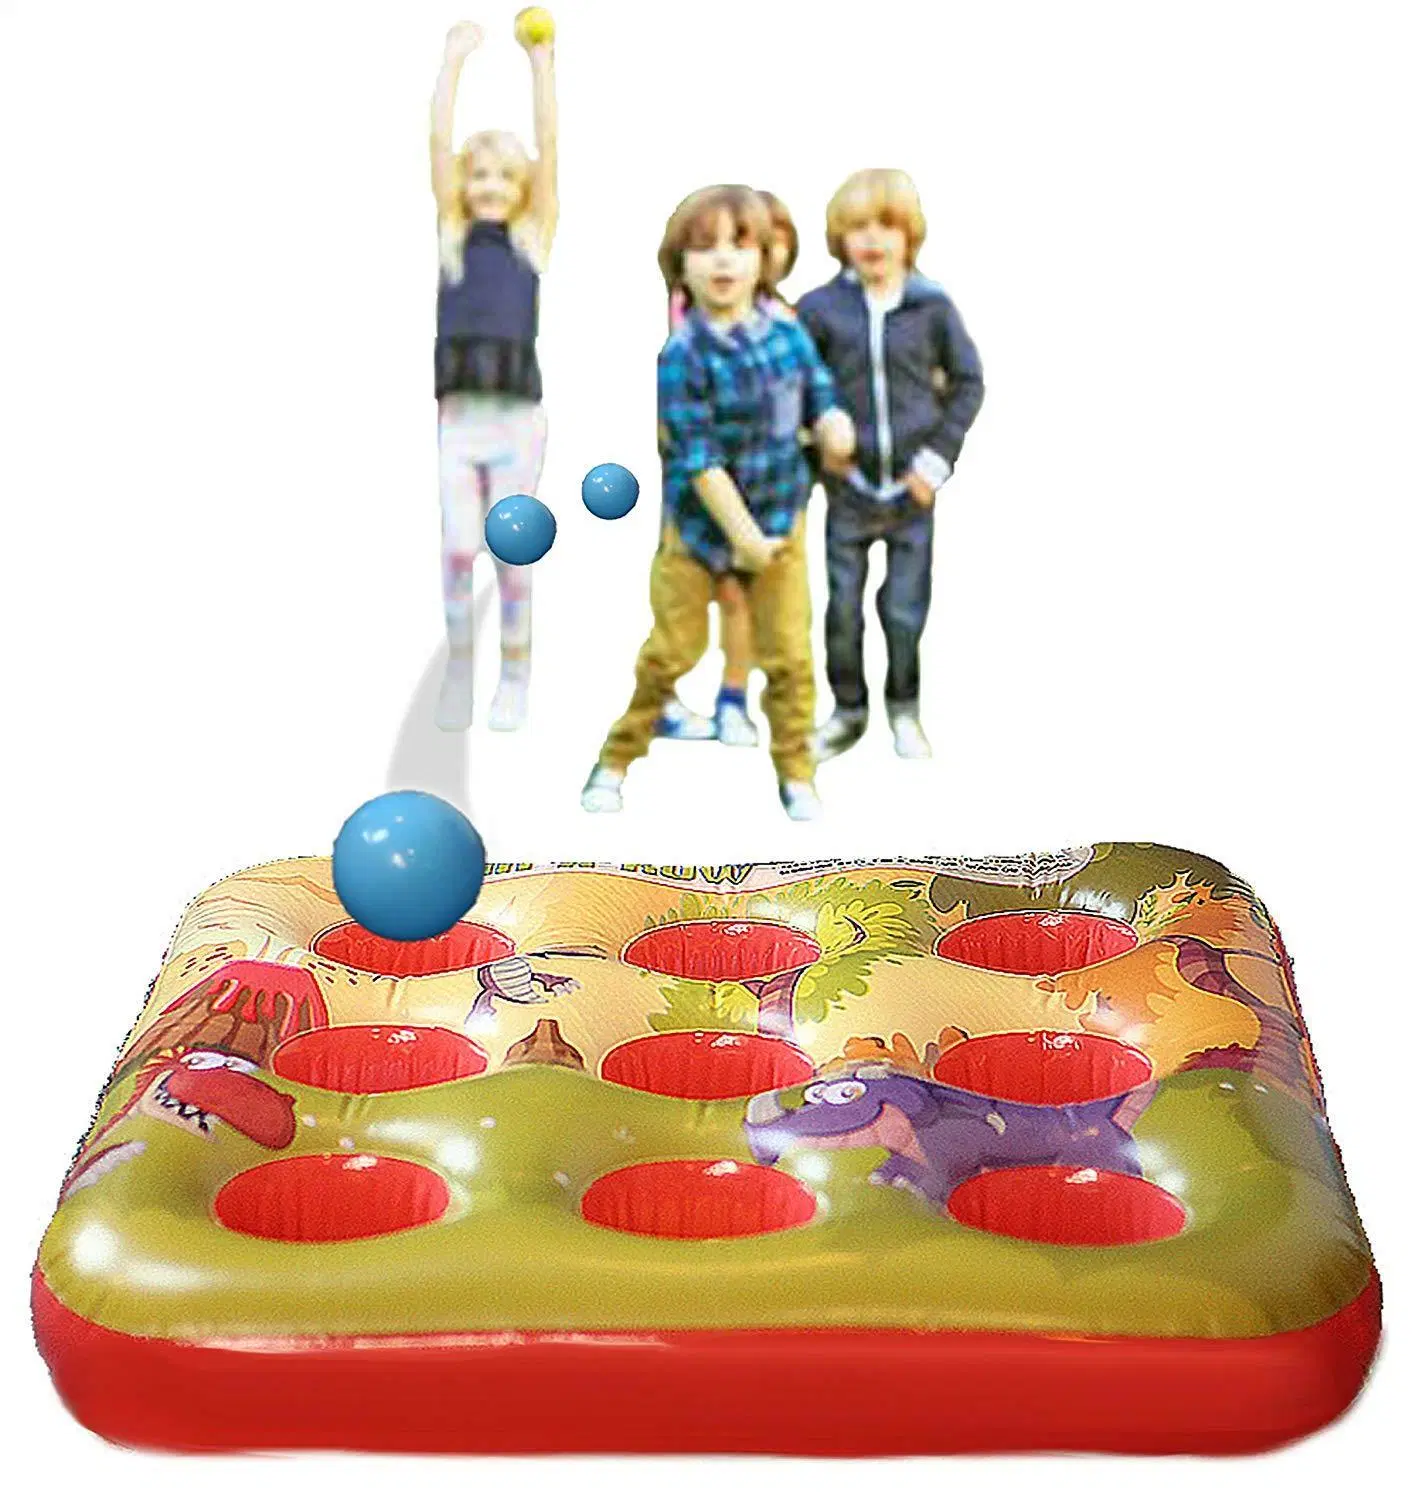 Outdoor Toy Inflatable 2 in 1 Target Ball Game